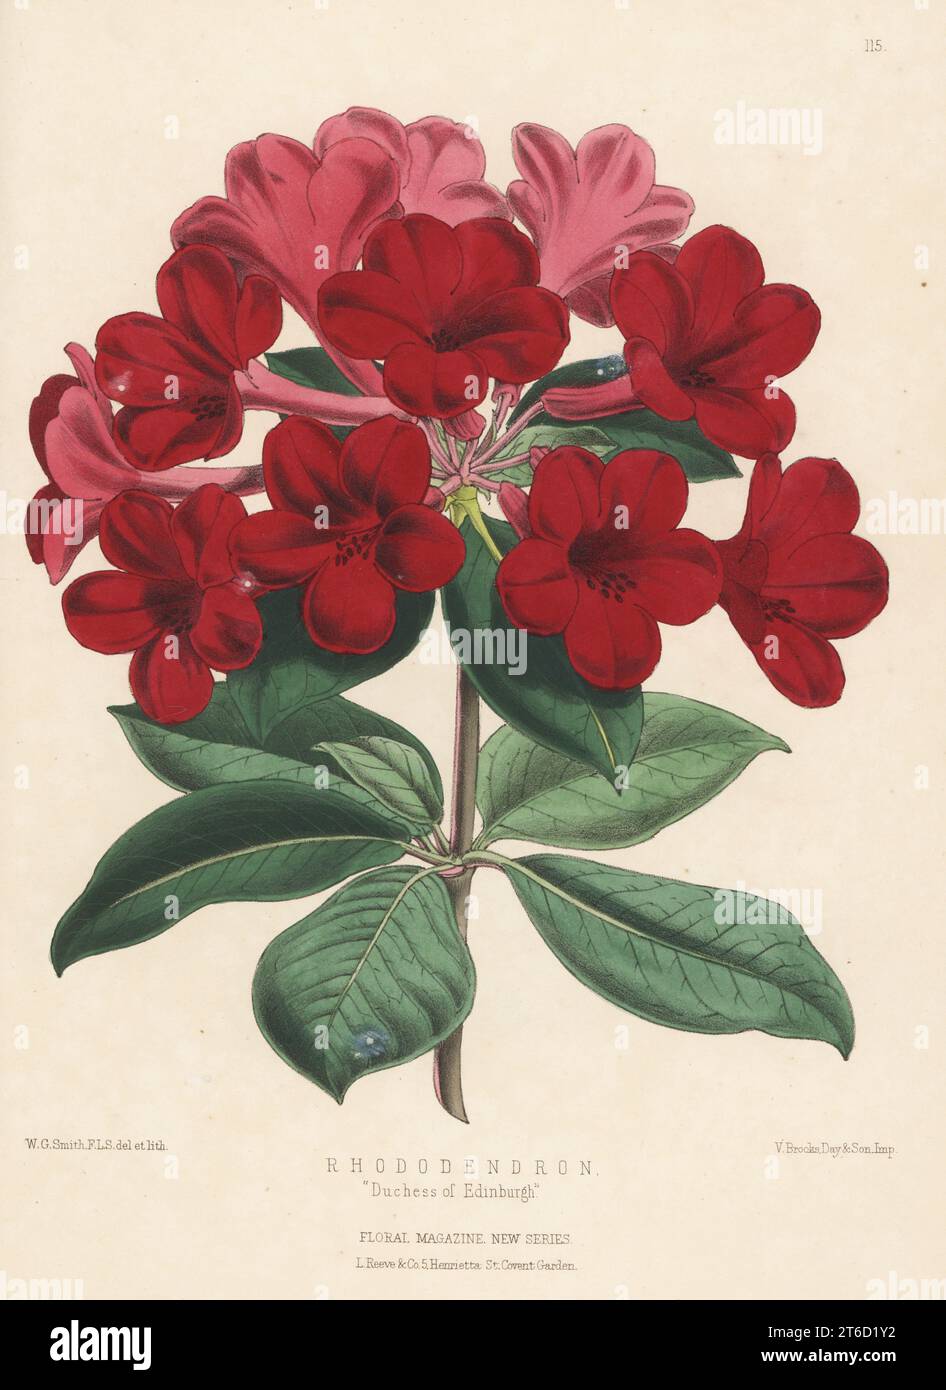 Rhododendron cultivar, Duchess of Edinburgh. Hybrid of R. Princess Royal and R. lobbii, raised by Veitch and Sons of Chelsea. Handcolored botanical illustration drawn and lithographed by Worthington George Smith from Henry Honywood Dombrain's Floral Magazine, New Series, Volume 3, L. Reeve, London, 1874. Lithograph printed by Vincent Brooks, Day & Son. Stock Photo